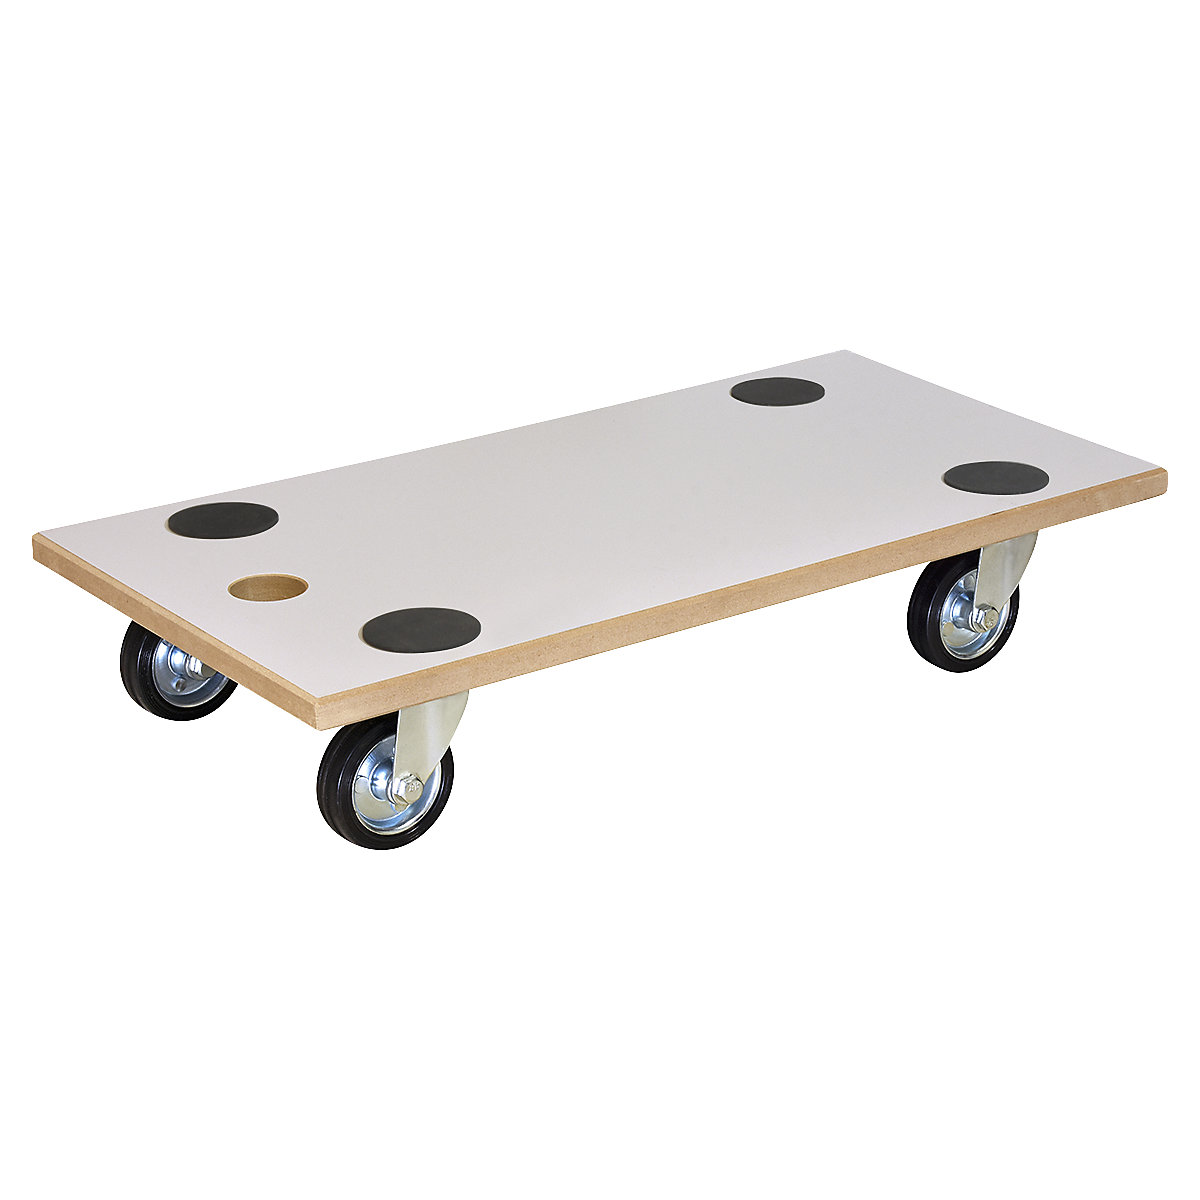 Transport dolly with grip hole – Wagner, MM 1316, castors for soft floors, pack of 2, LxW 575 x 300 mm, 2+ packs-5